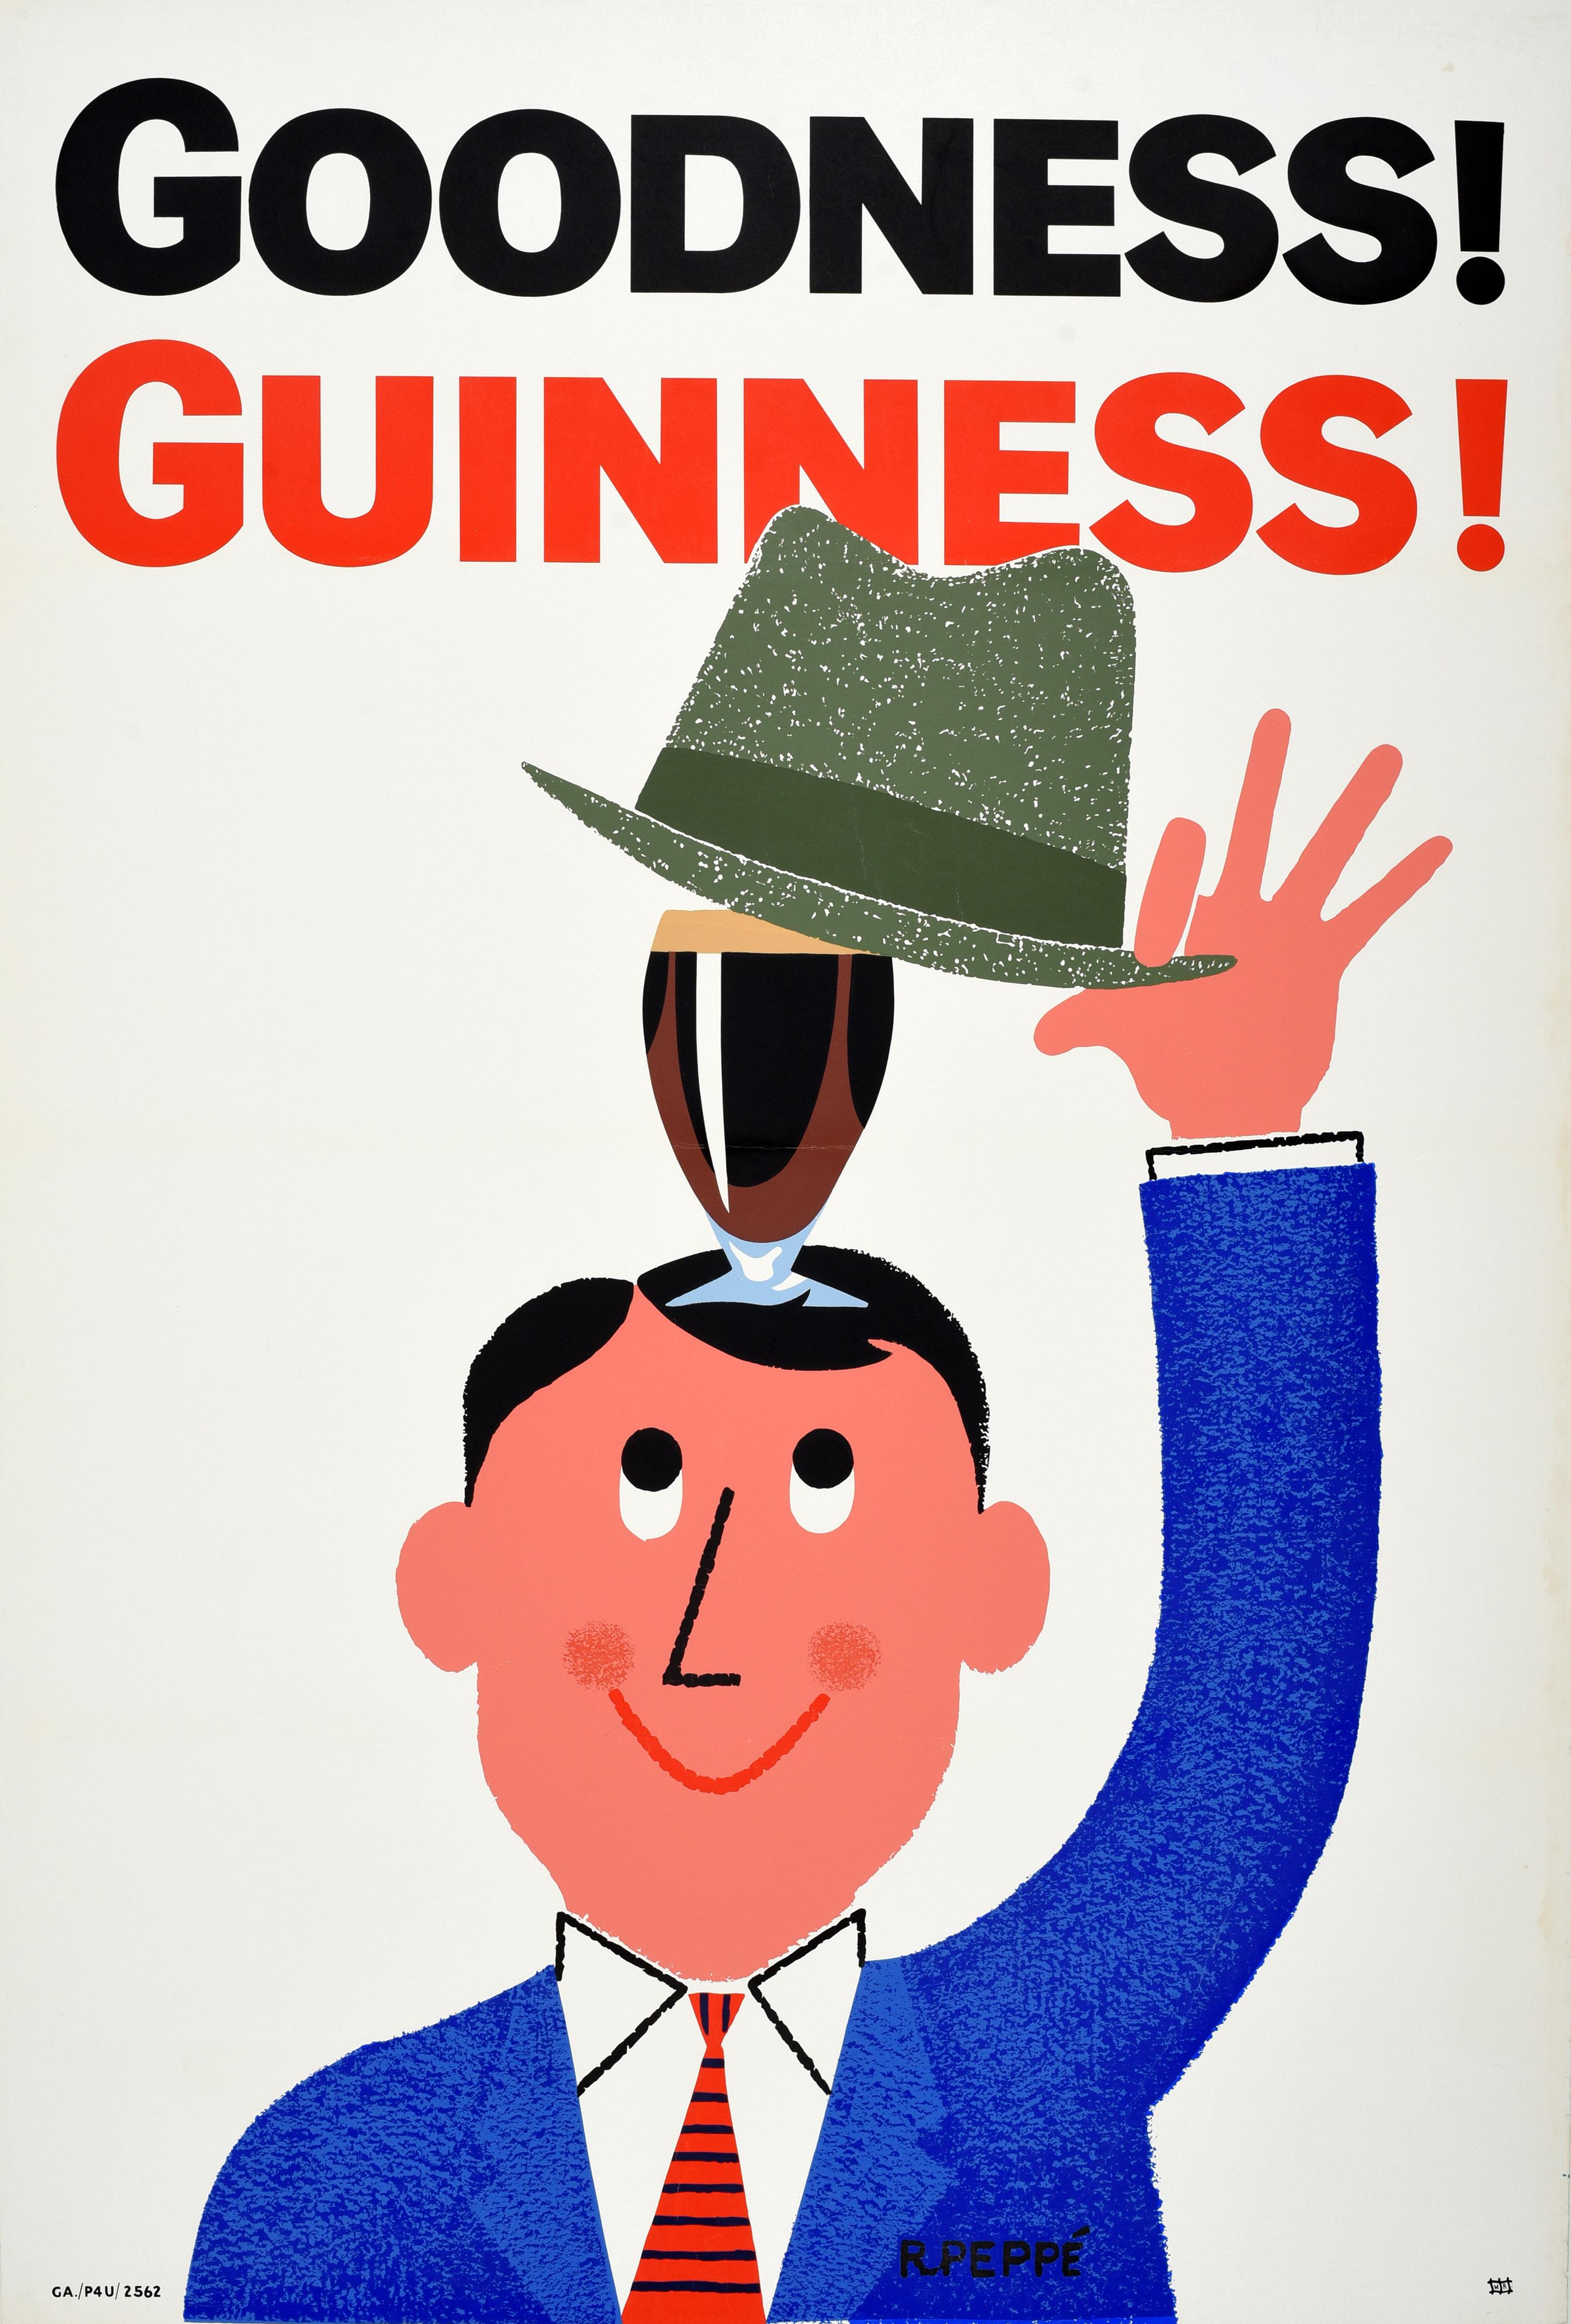 Unknown Print - Original Vintage Advertising Poster Guinness Goodness Hat Irish Stout Beer Drink